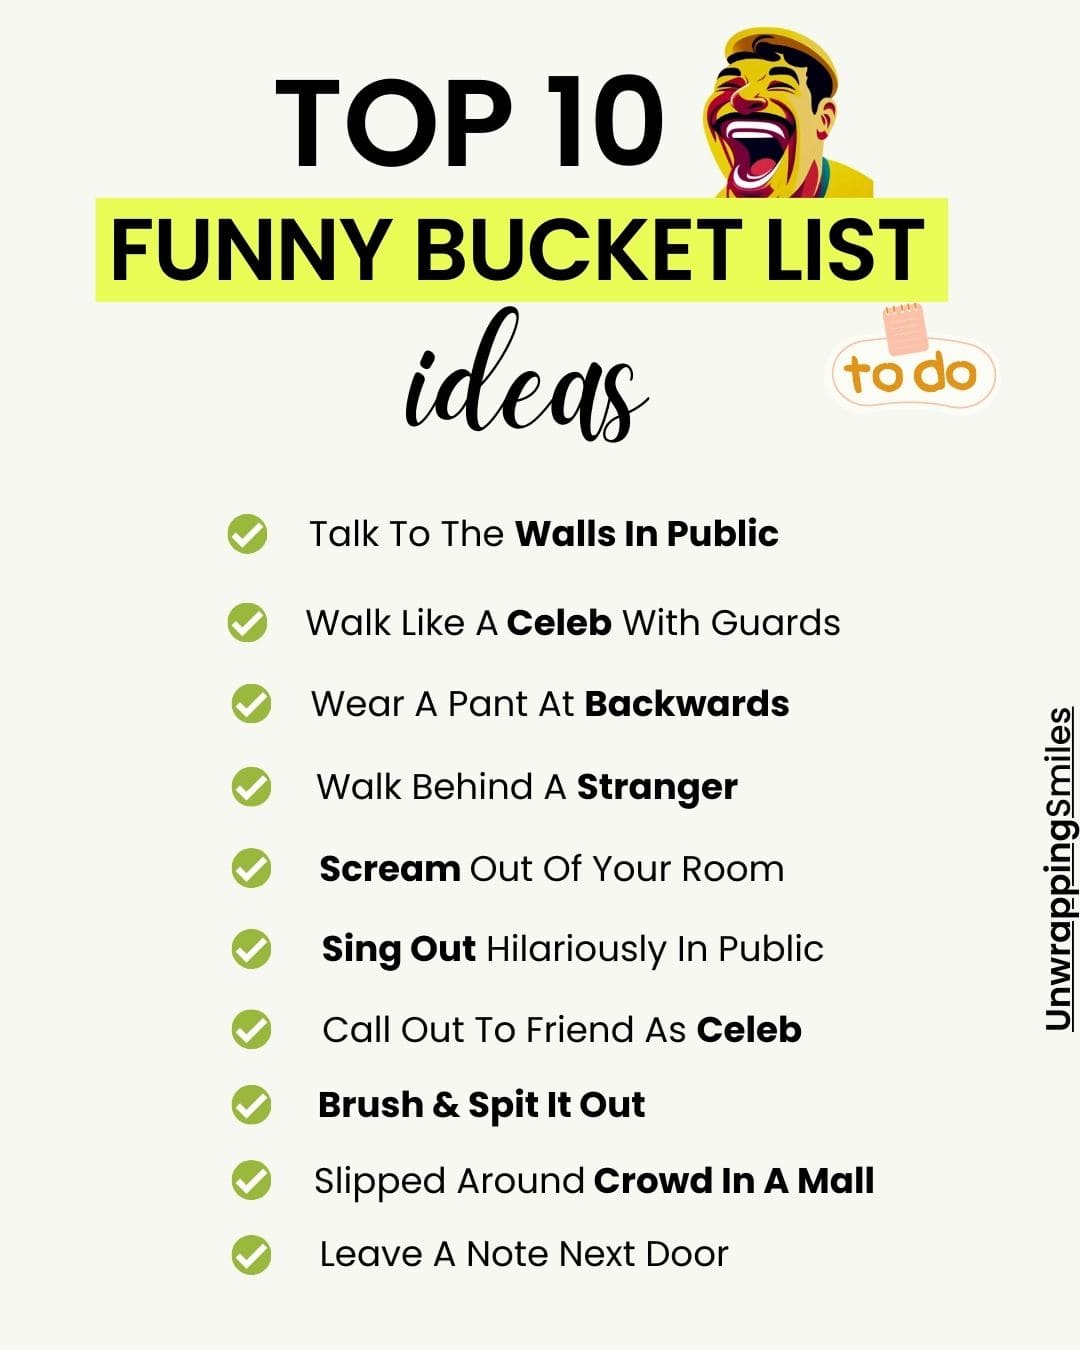 41 Crazy And Funny Bucket List Ideas To Pull Out Utmost Insanity